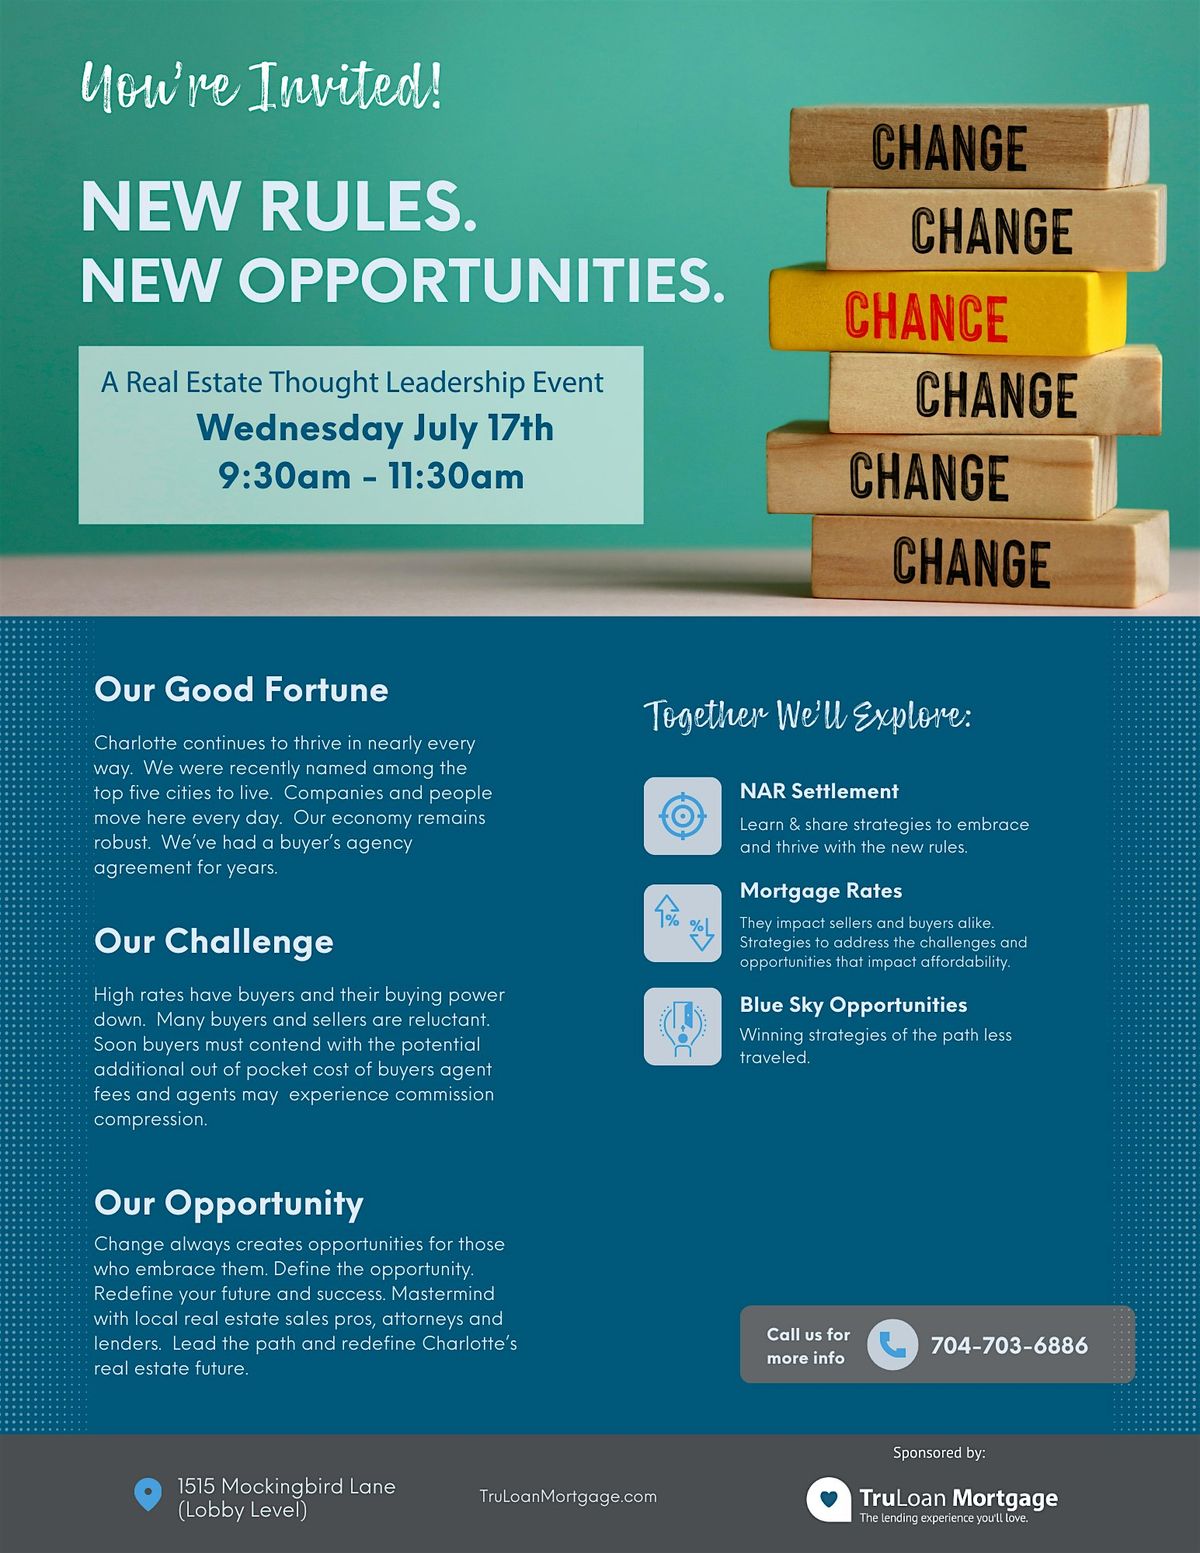 New Rules. New Opportunities. A Real Estate Thought Leadership Event.